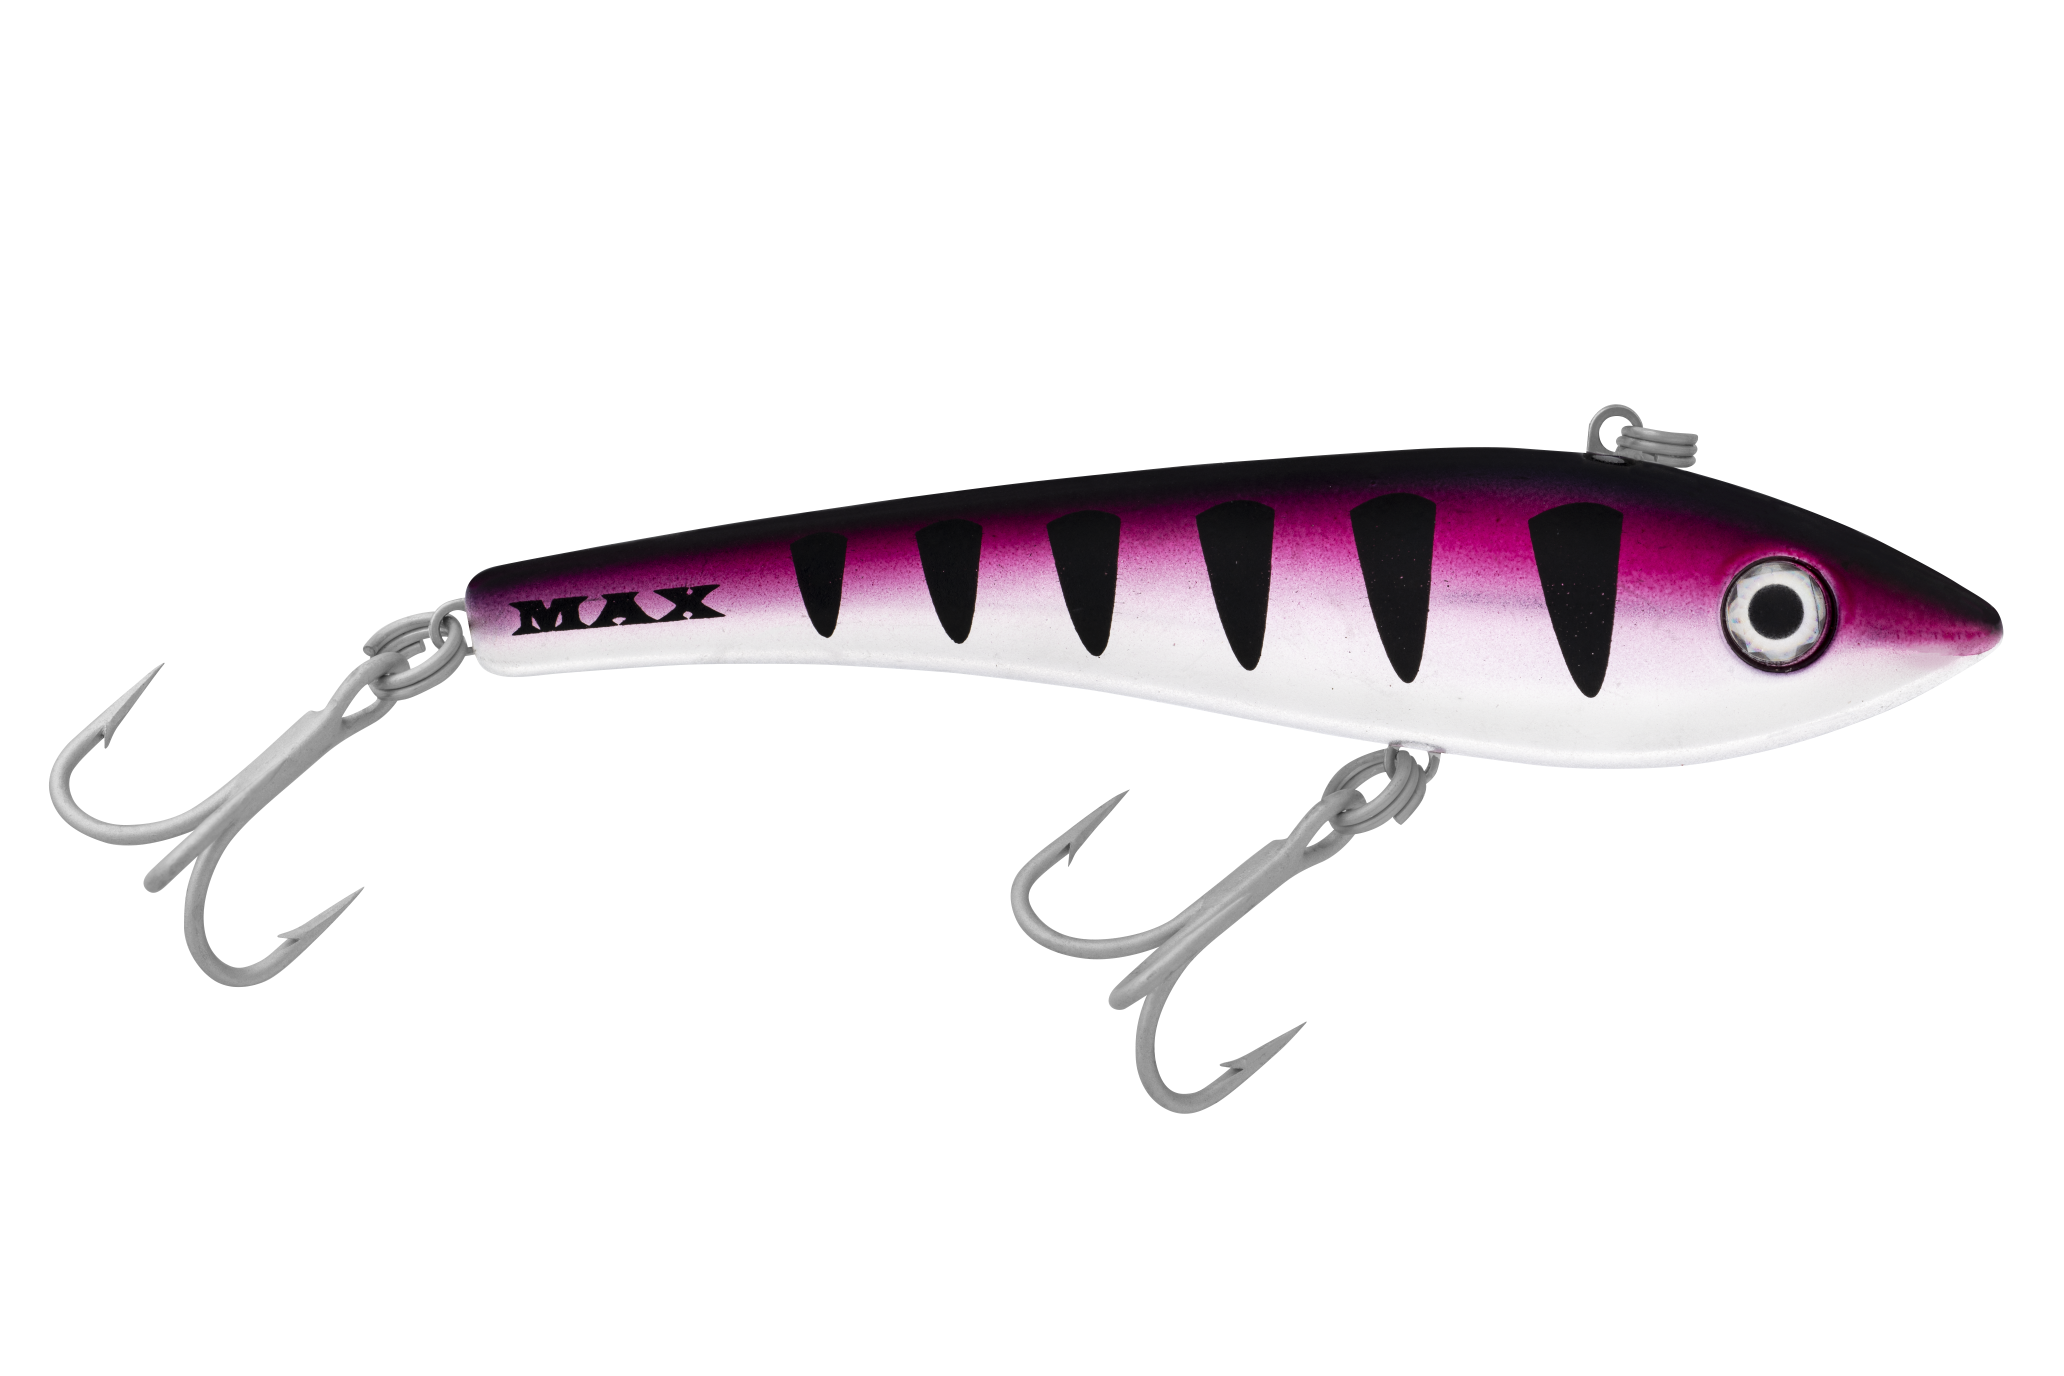 Halco Max 130 - Chrome Tiger [MAX130-CHROM (INDONESIA)] - $18.99 CAD :  PECHE SUD, Saltwater fishing tackles, jigging lures, reels, rods